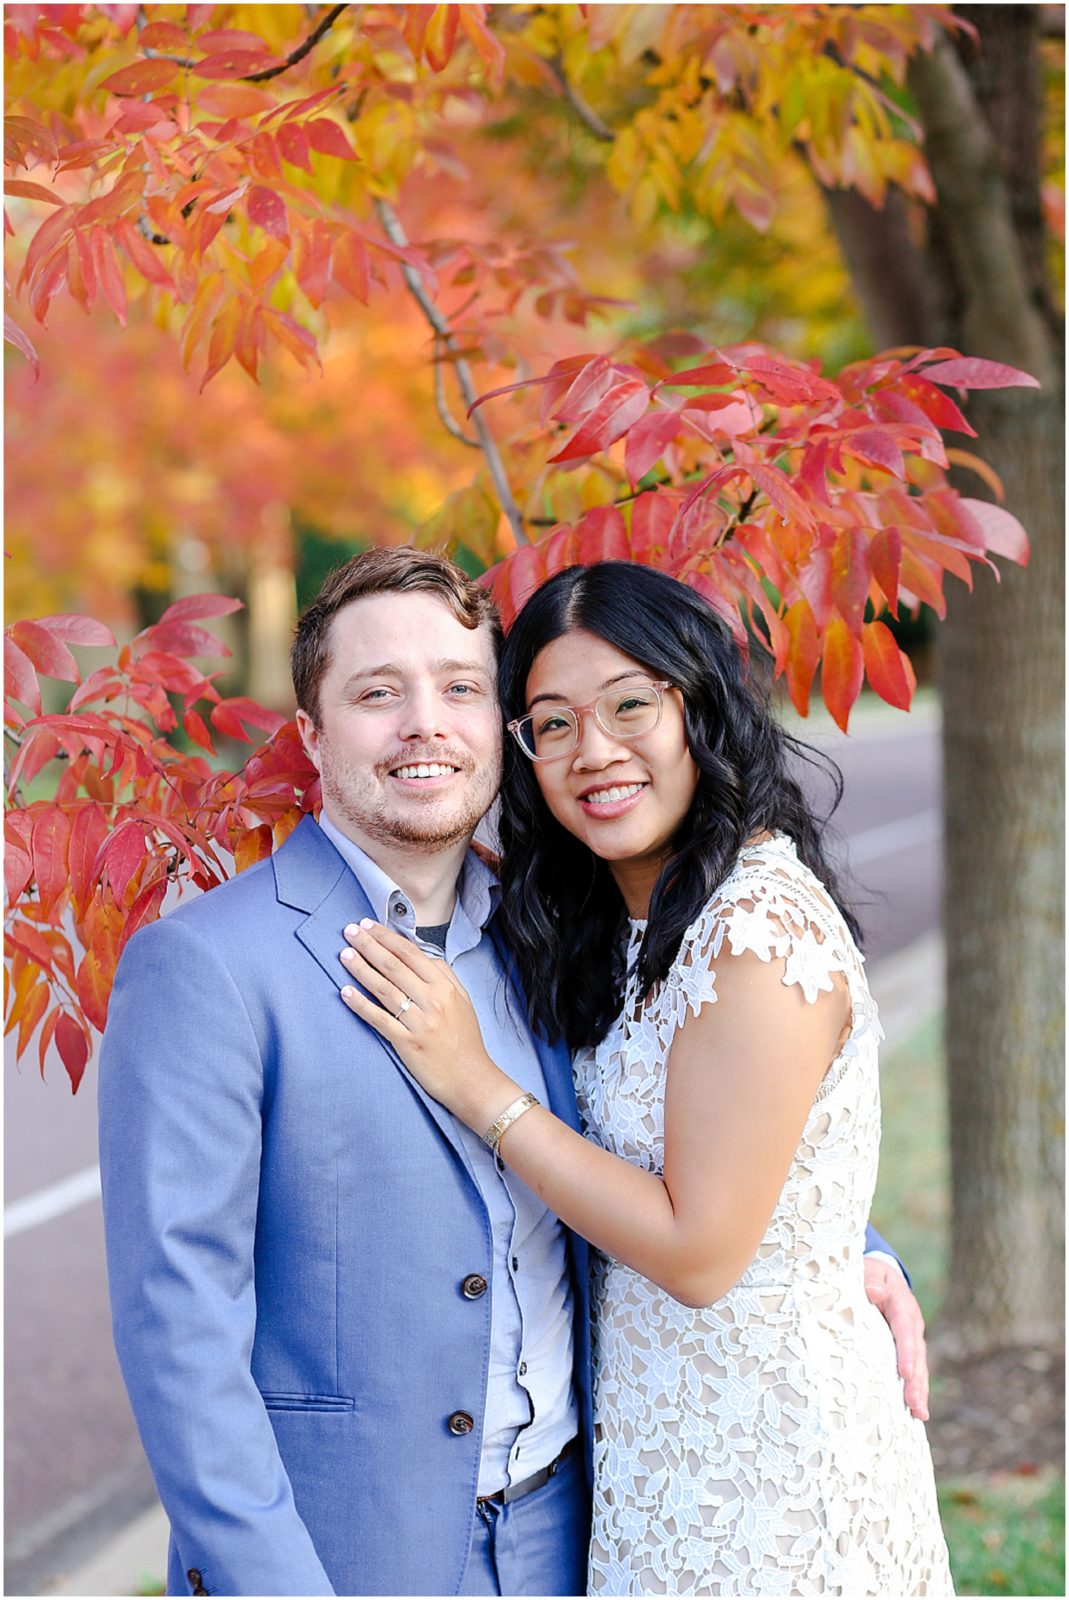 happy couple - how to pose for engagement photos - what to wear for engagement photos - fall foliage - fall engagement photos in kansas city and overland park 